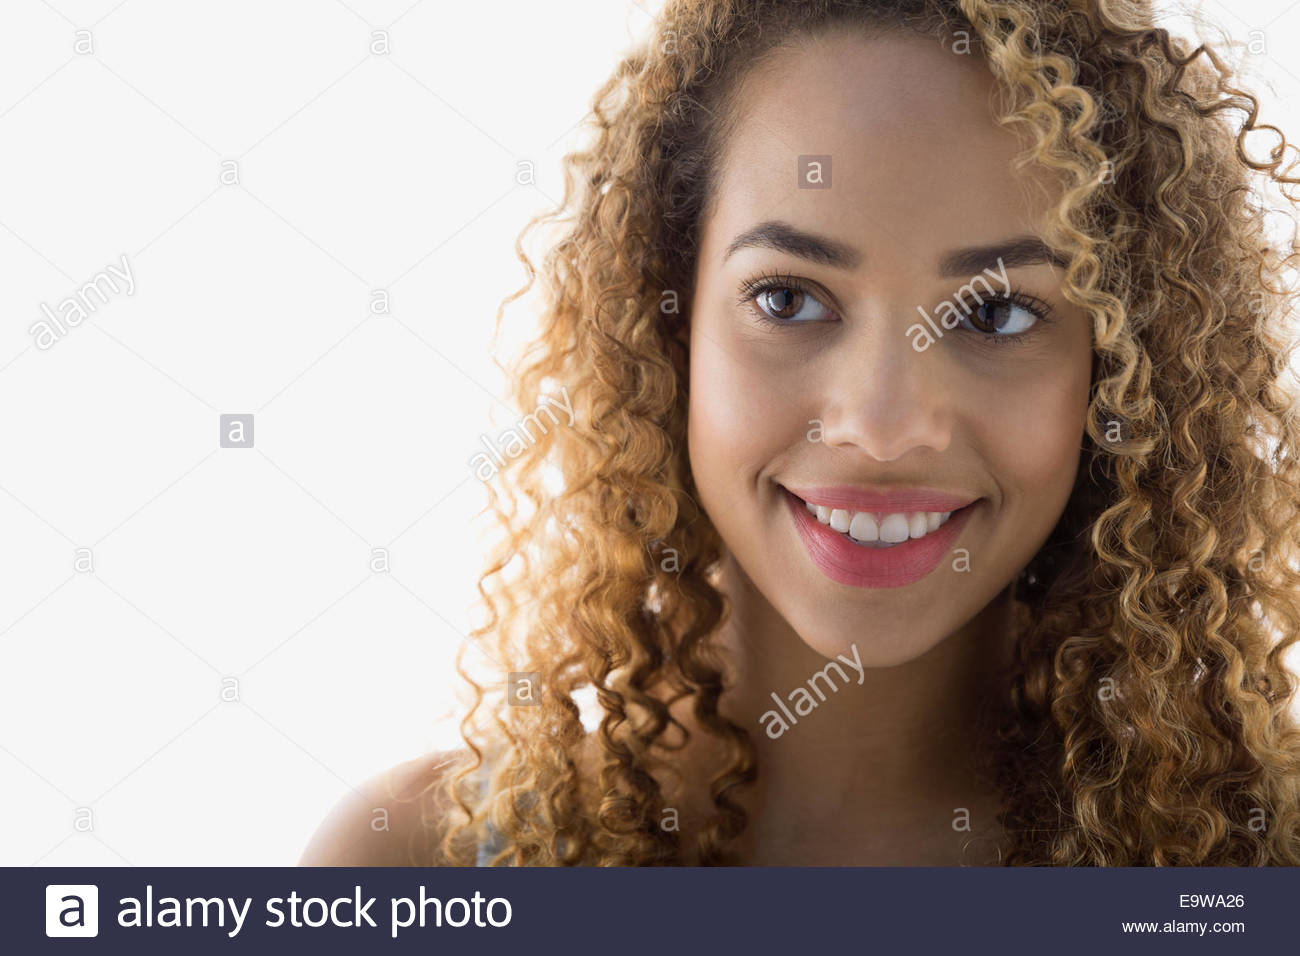 Smiling woman with curly hair looking away Stock Photo